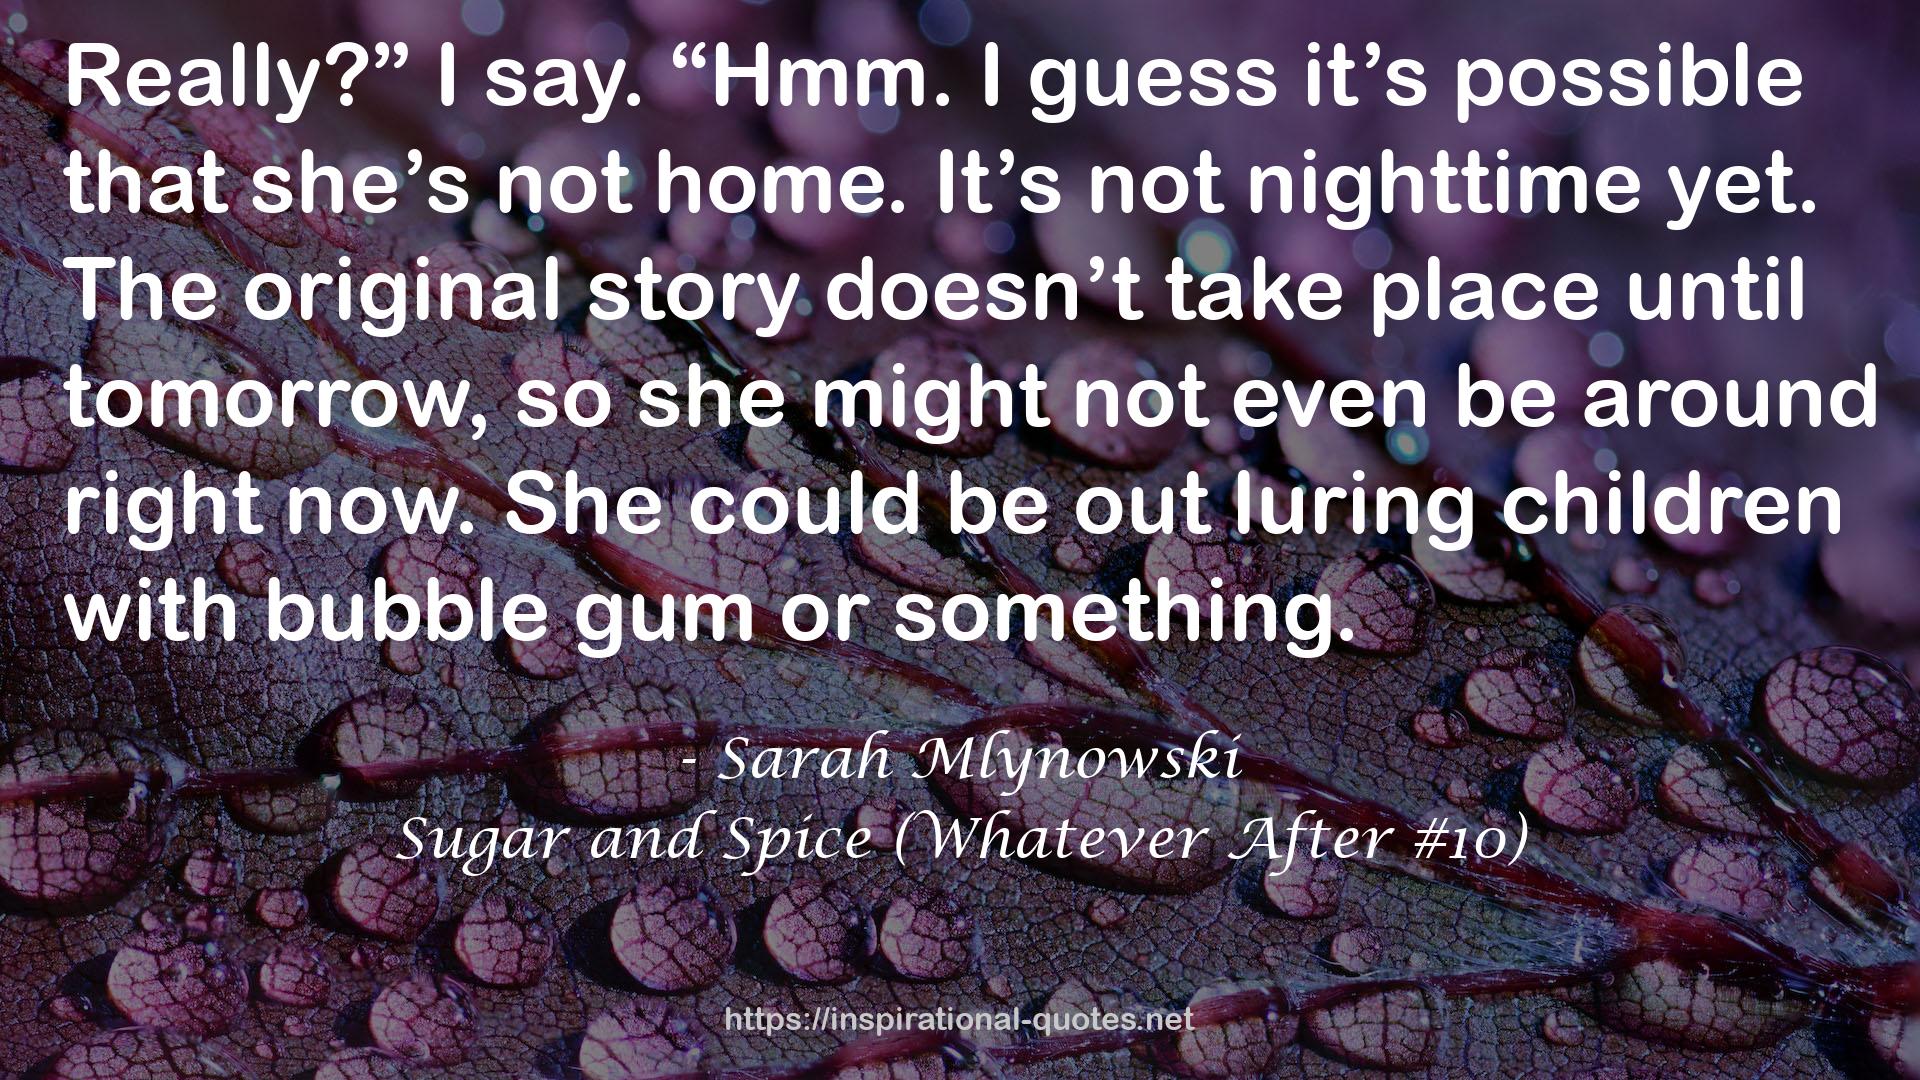 Sugar and Spice (Whatever After #10) QUOTES